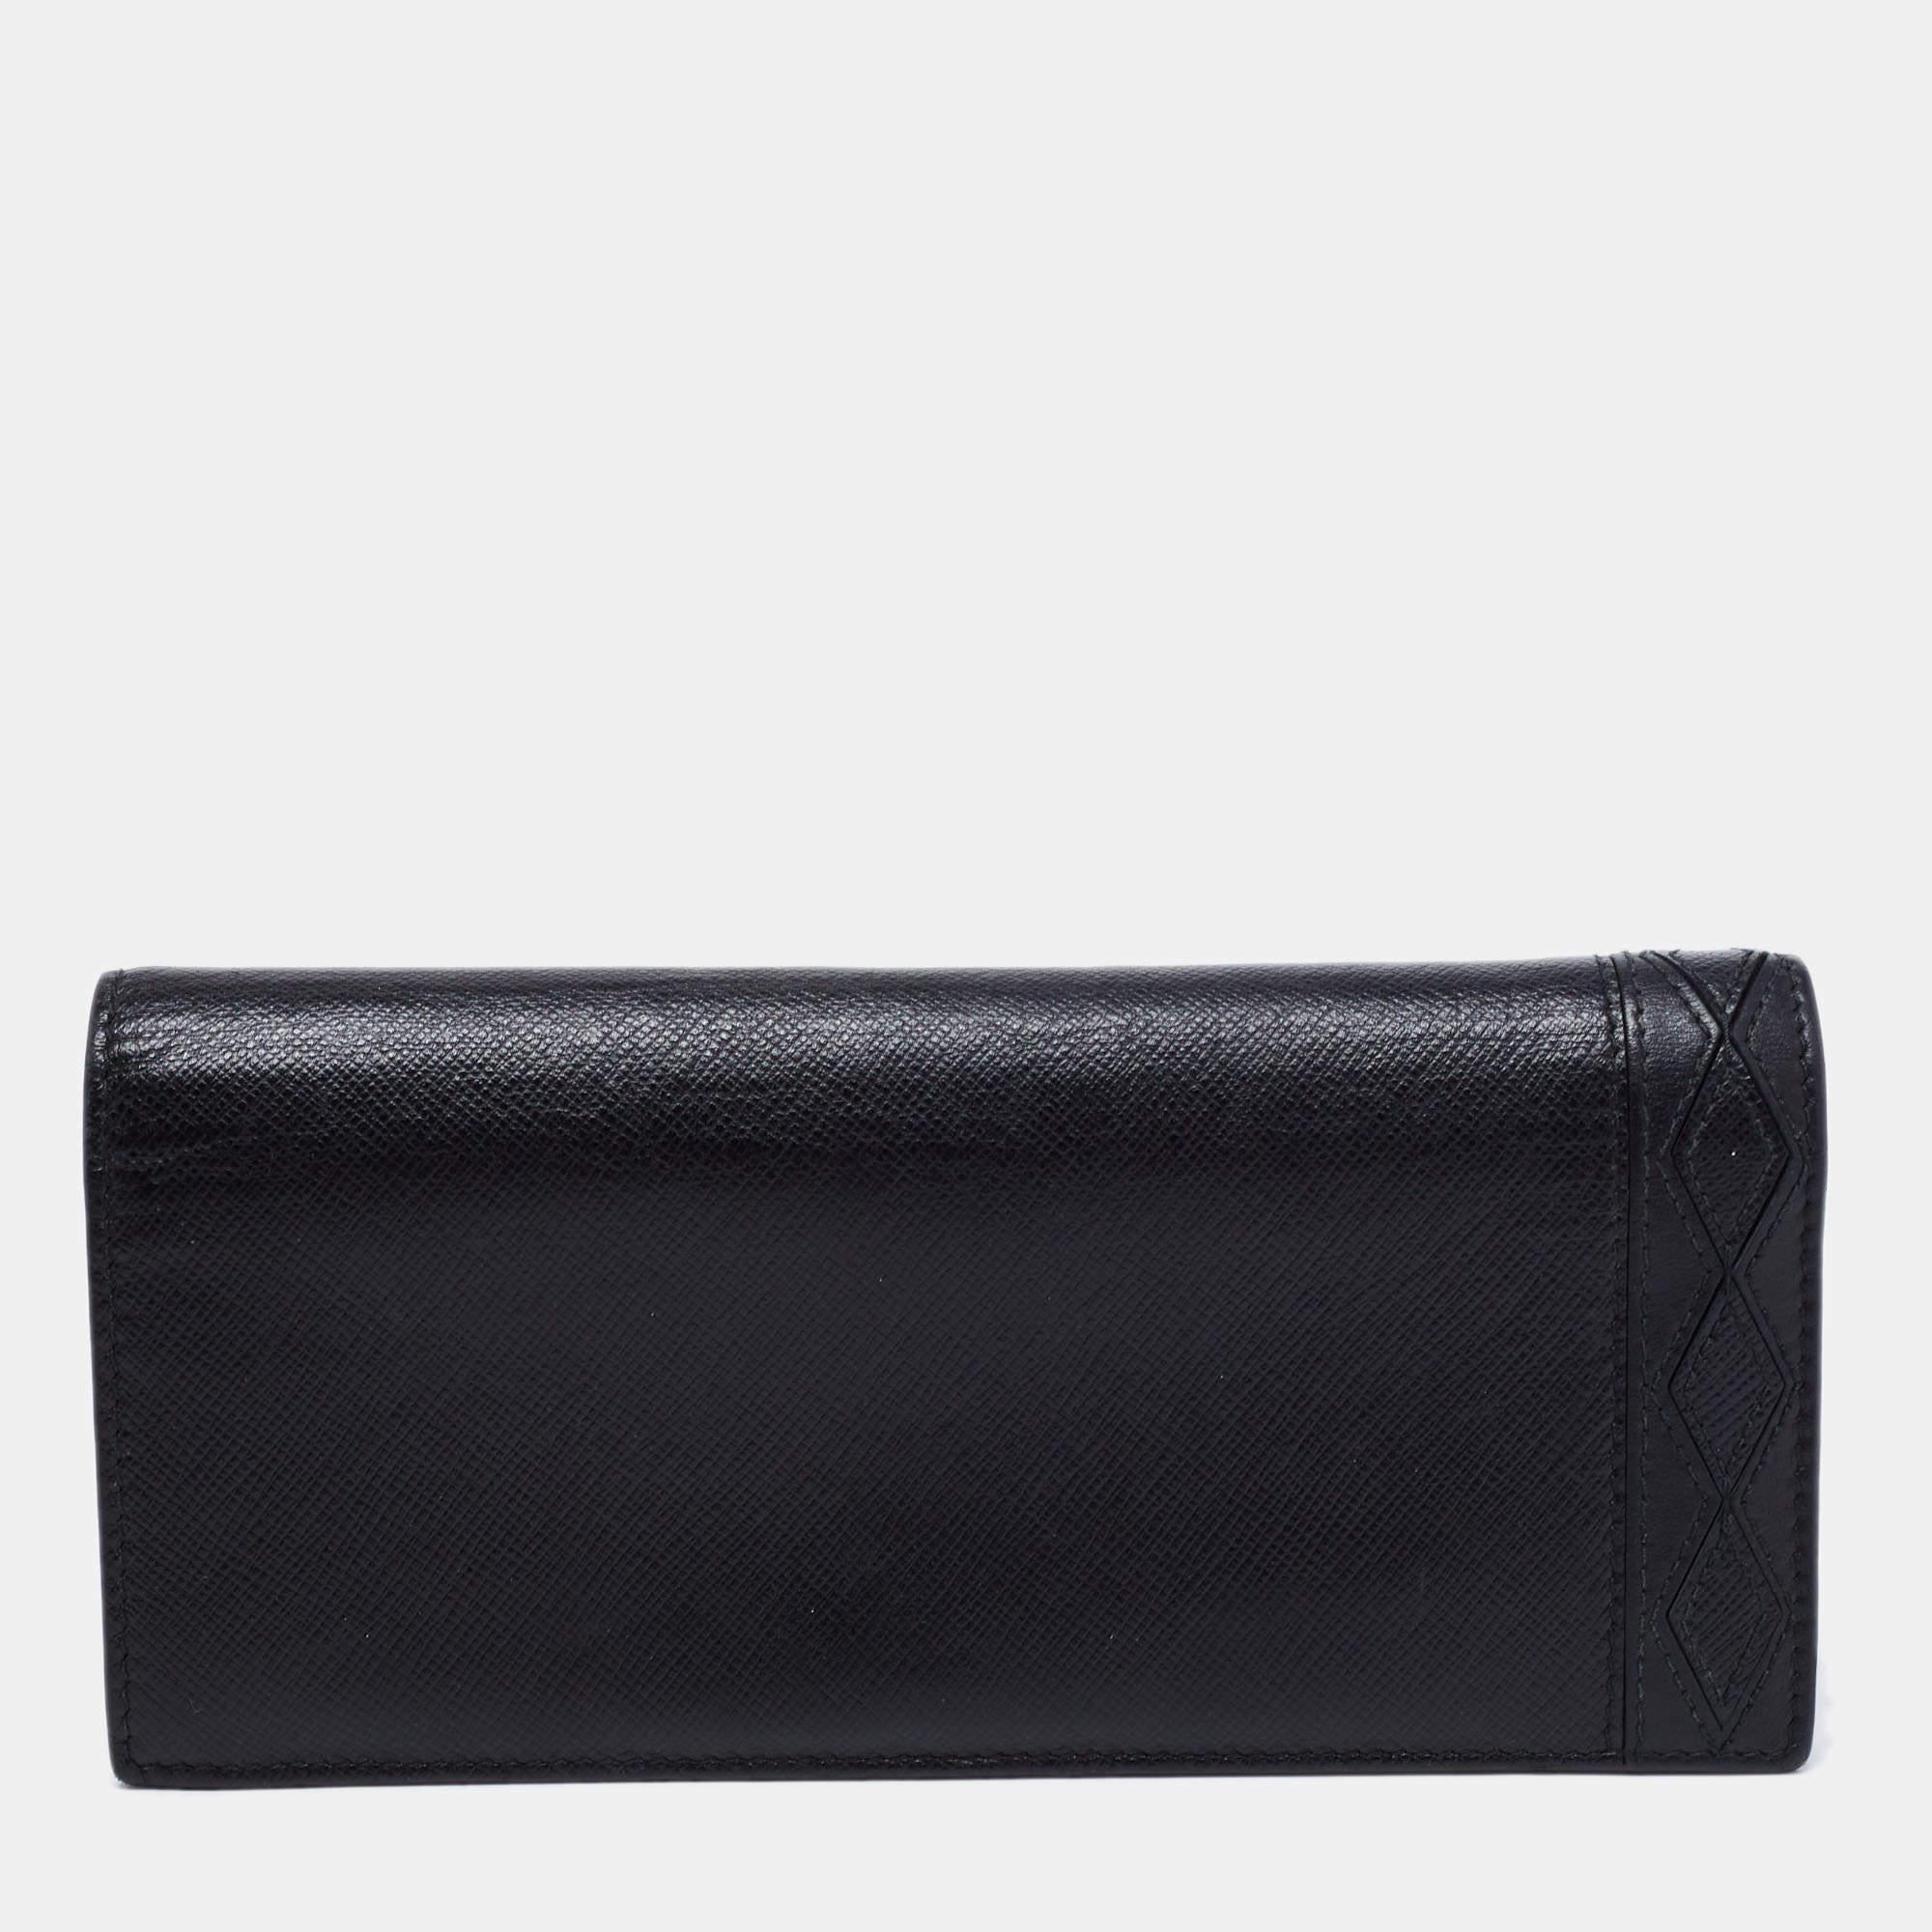 This Prada wallet is an immaculate balance of sophistication and rational utility. It has been designed using Saffiano leather and is elevated by a sleek finish. The black-hued, long bifold wallet is equipped with ample space for your monetary